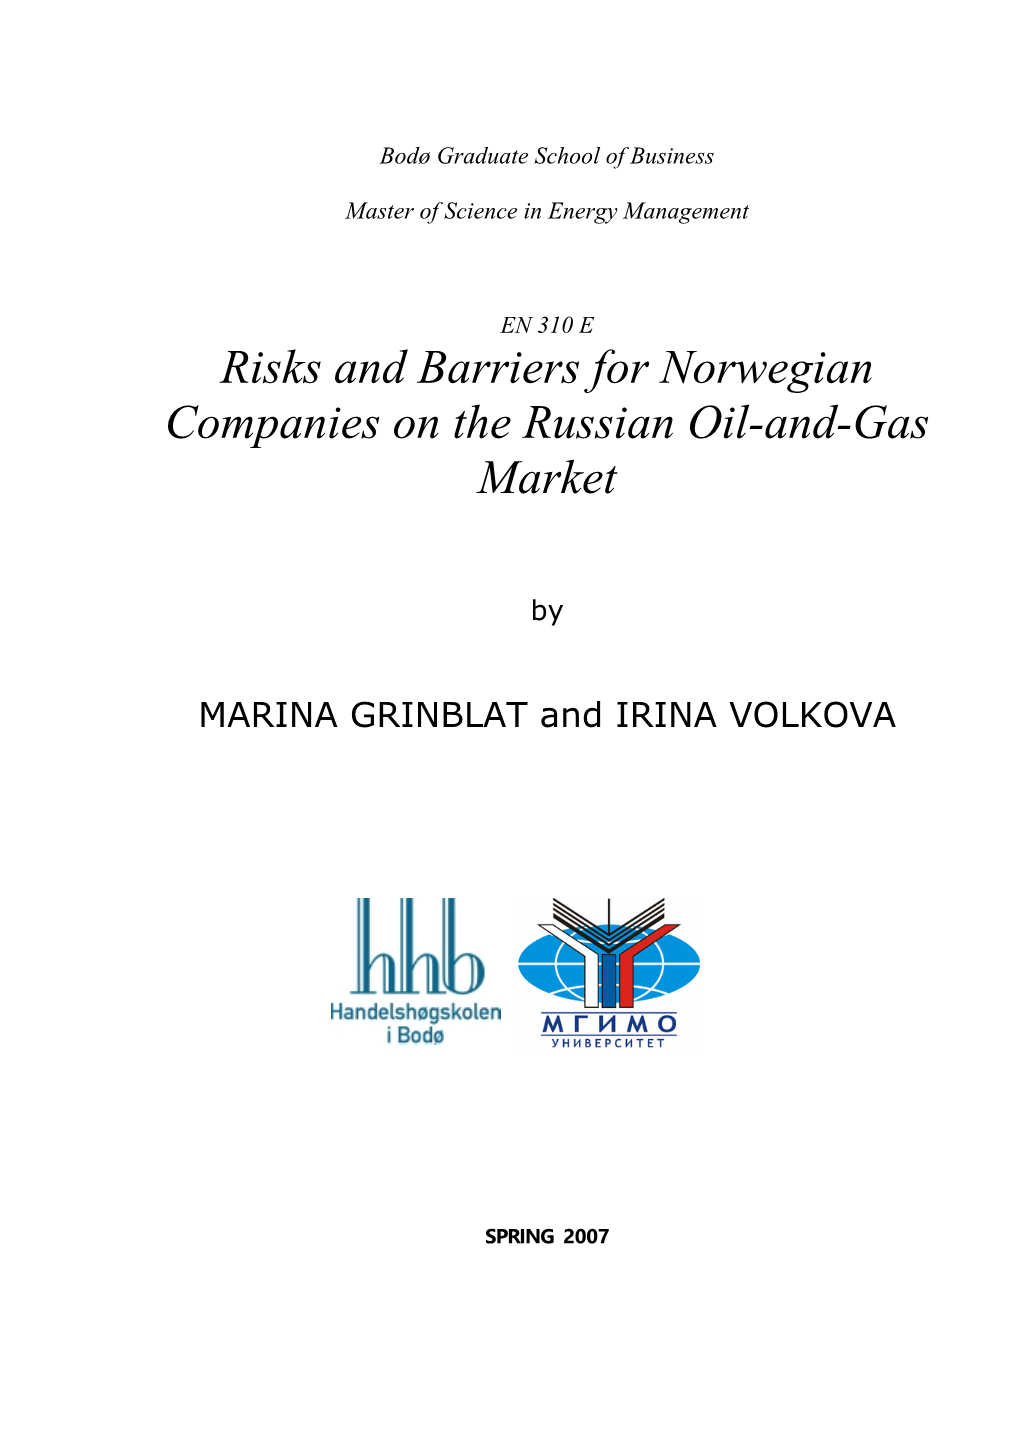 Risks and Barriers for Norwegian Companies on the Russian Oil-And-Gas Market